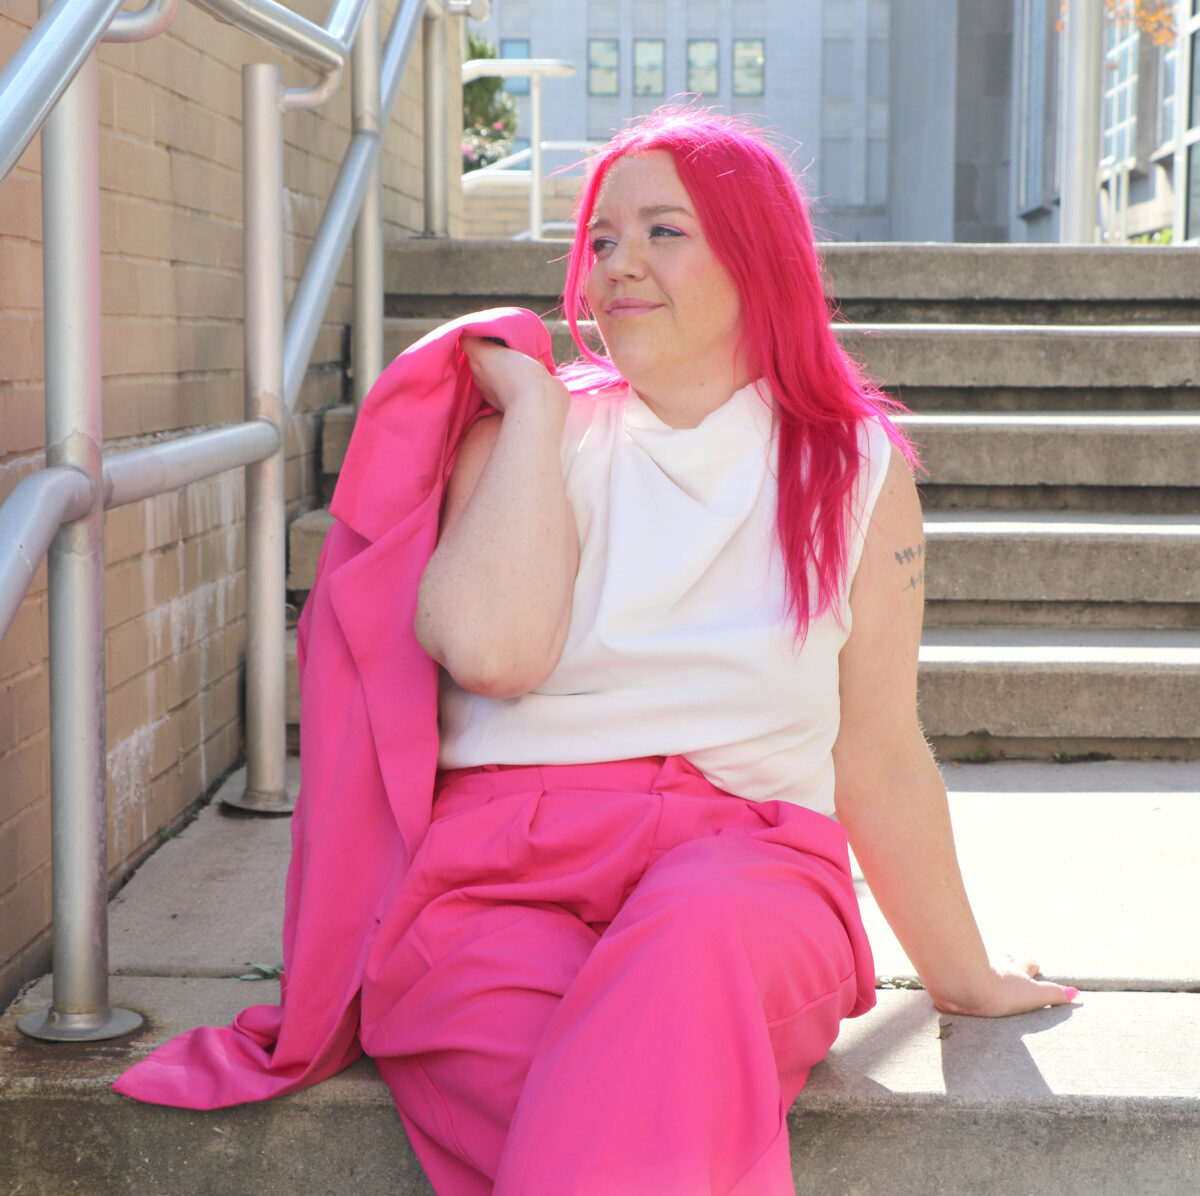 A woman with pink hair sitting on steps.